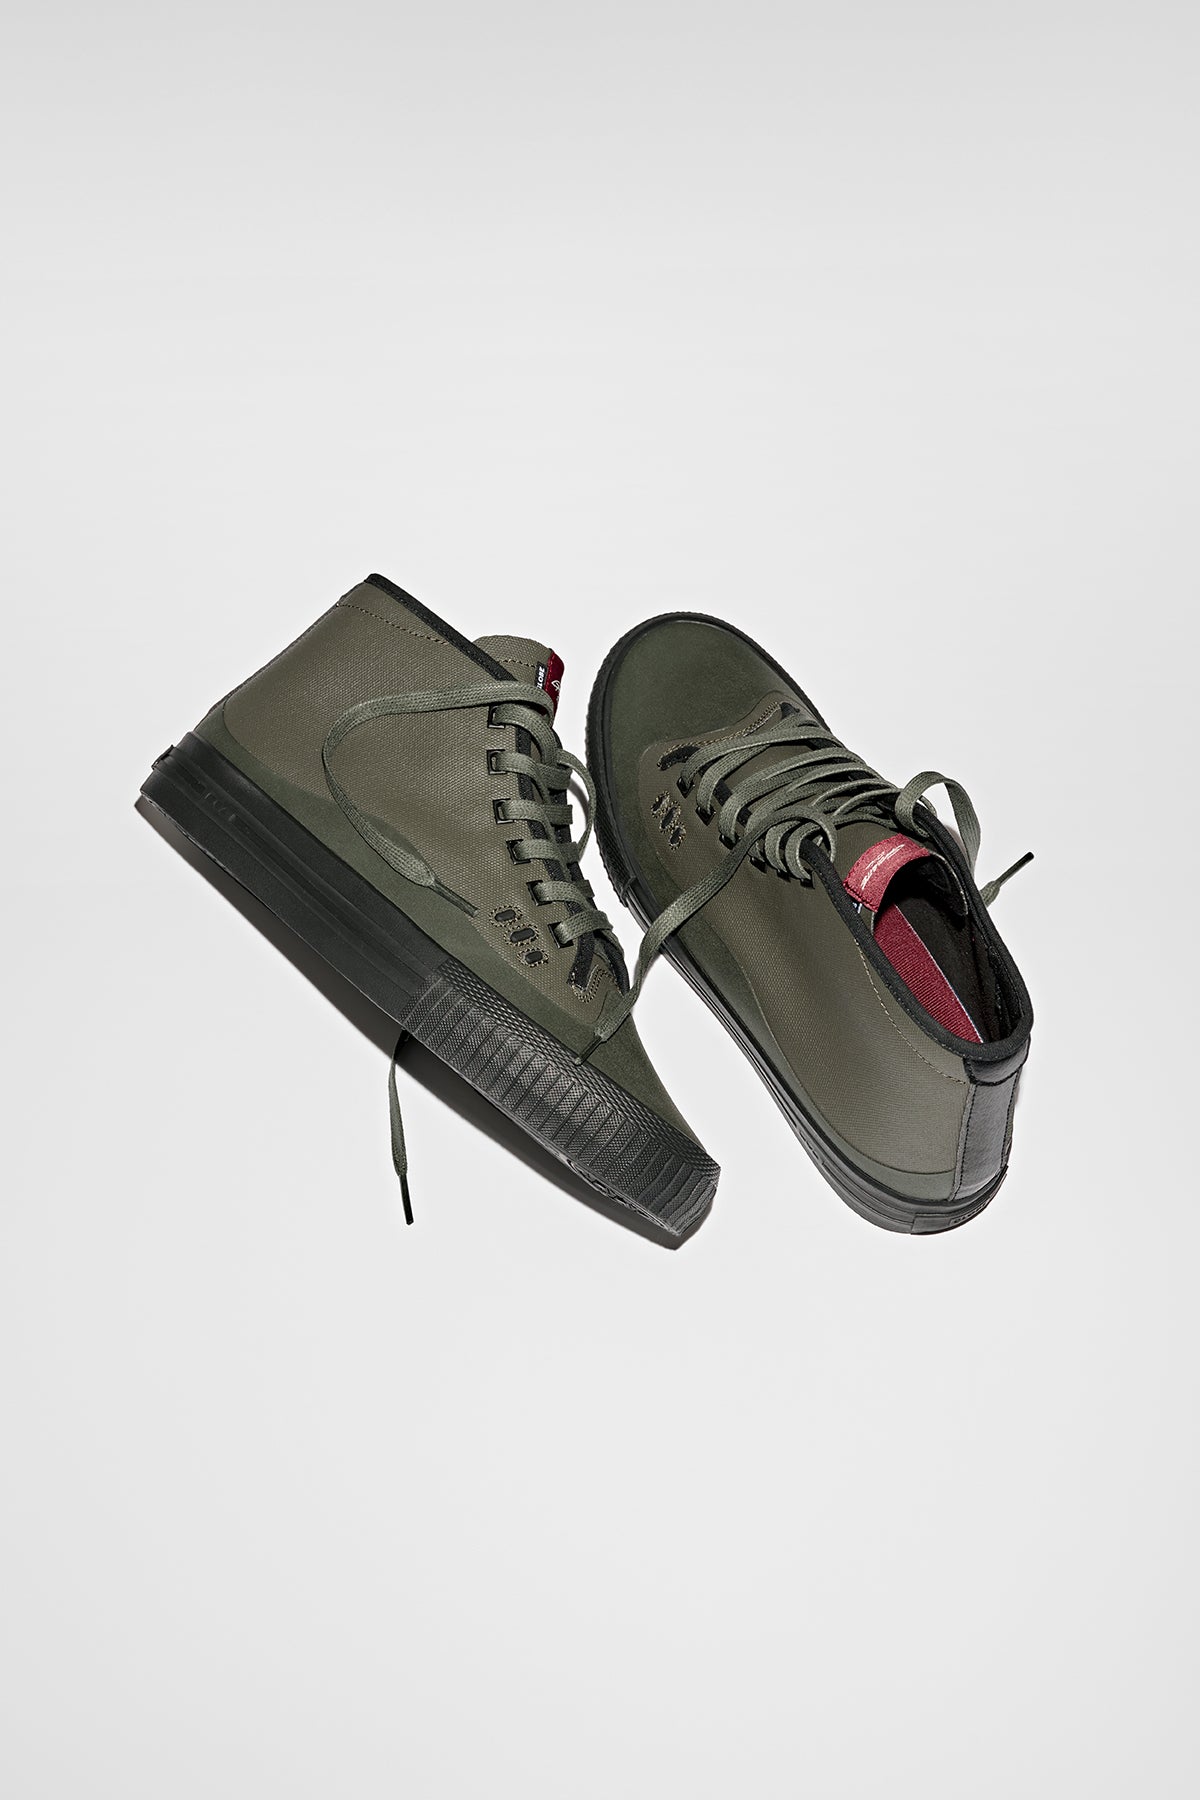 G Brown Shoes Puff Sneakers - Olive Suede – The QG